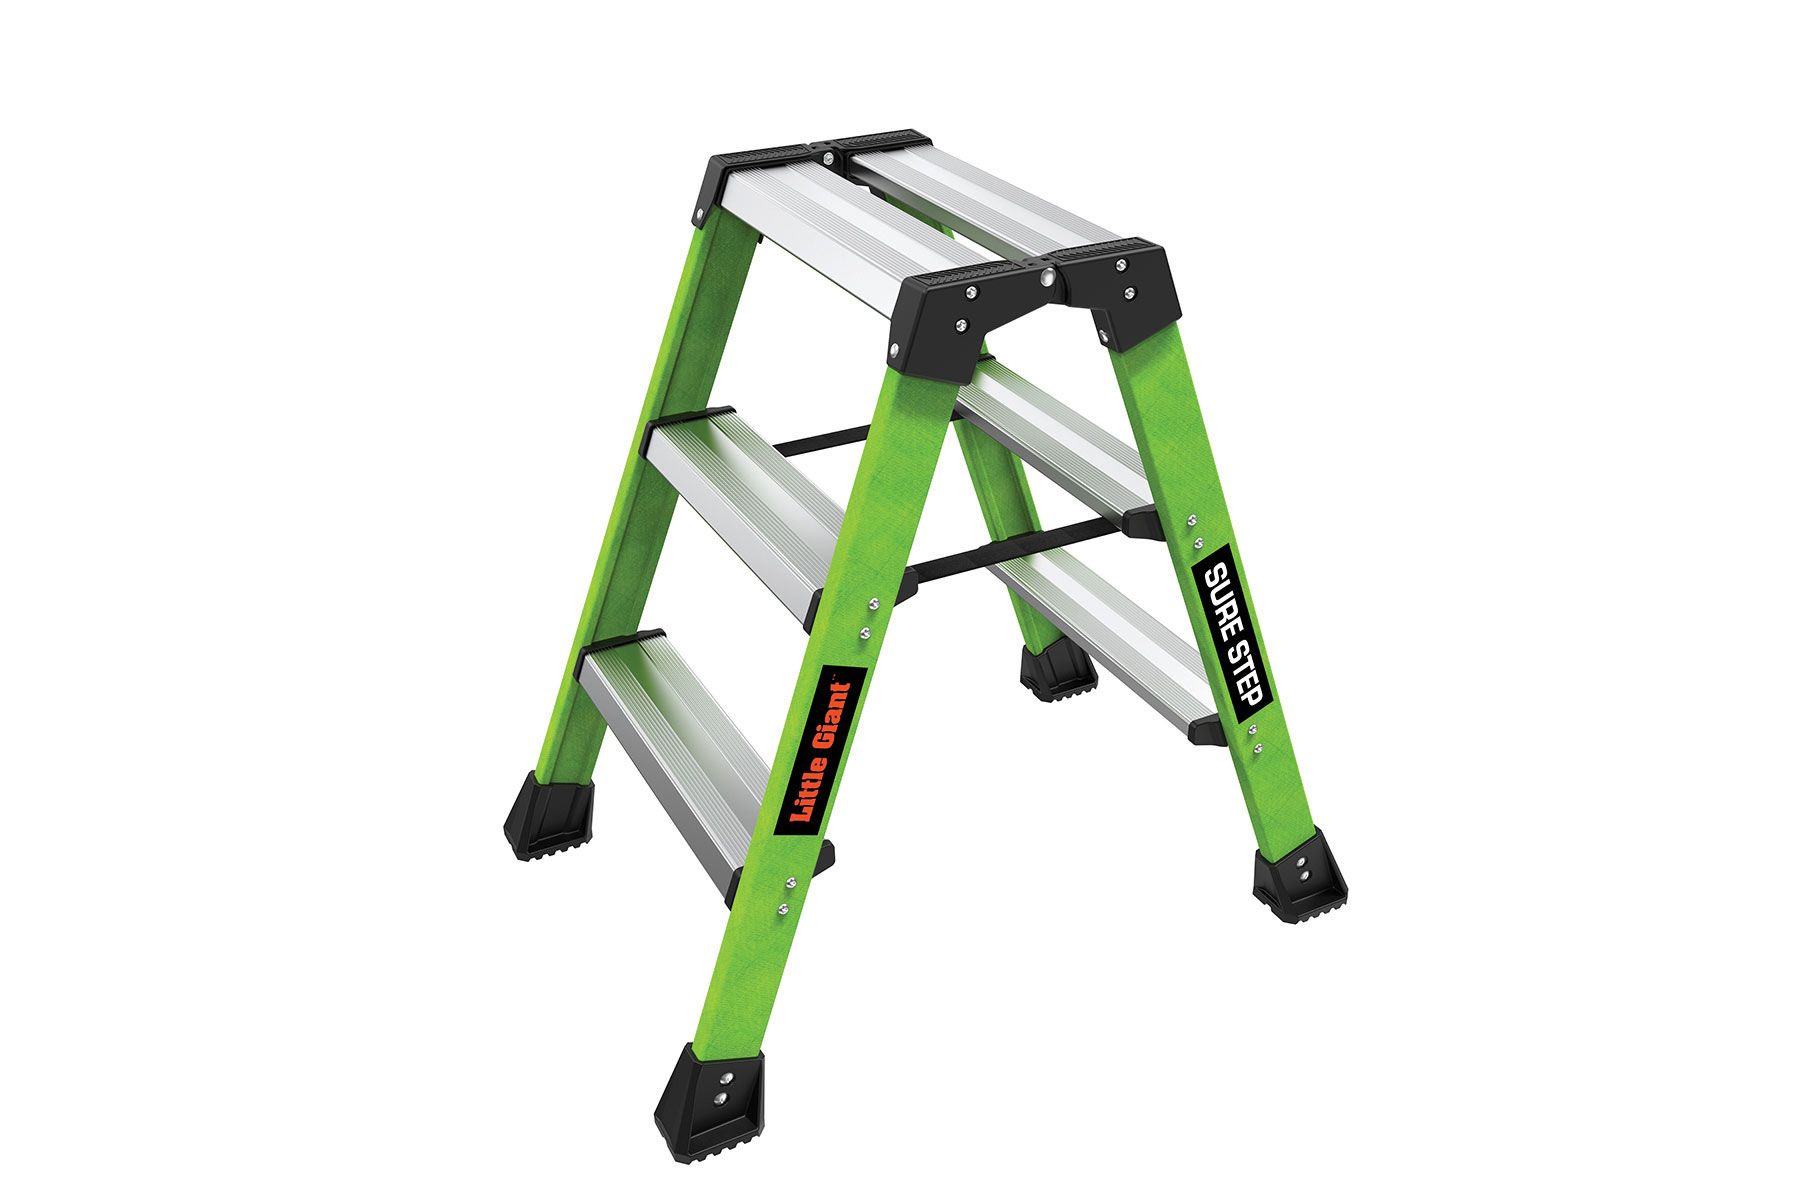 Green stepladder. Image by Little Giant.